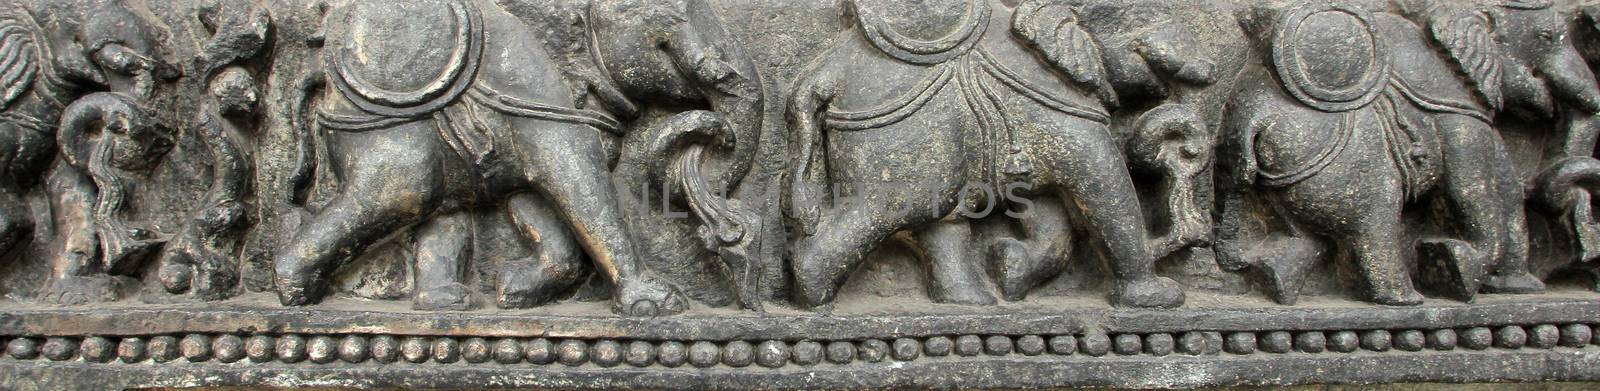 Elephants in a row, from 10th century found in Belvedere now exposed in the Indian Museum in Kolkata by atlas